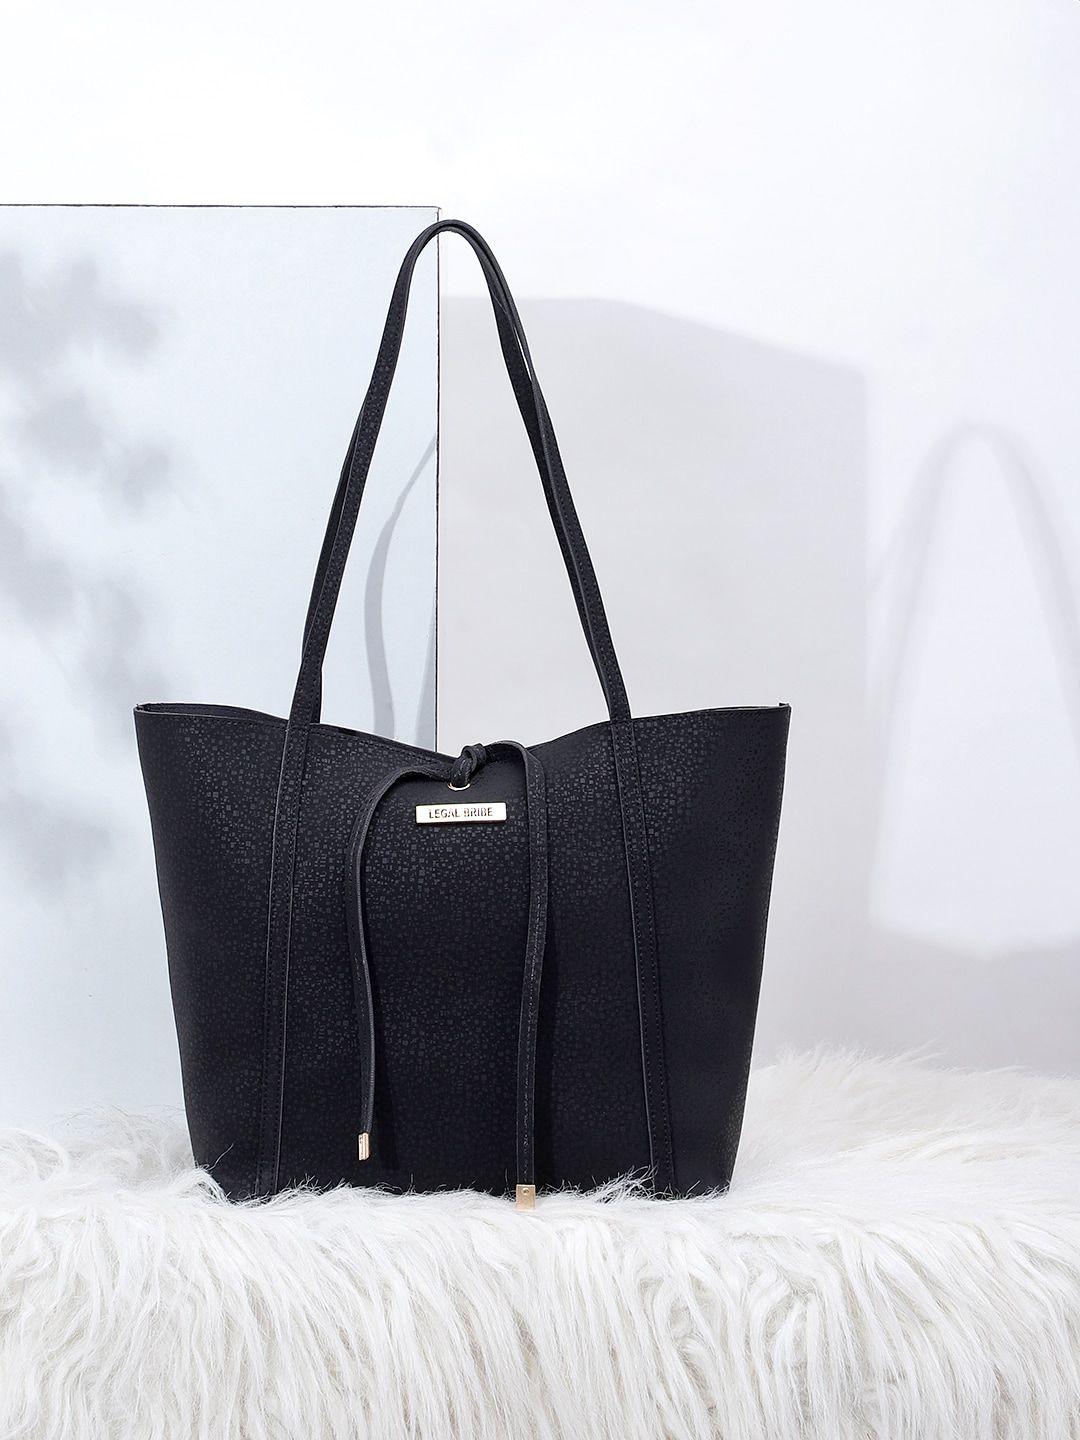 legal bribe women pu oversized shopper tote bag with tasselled